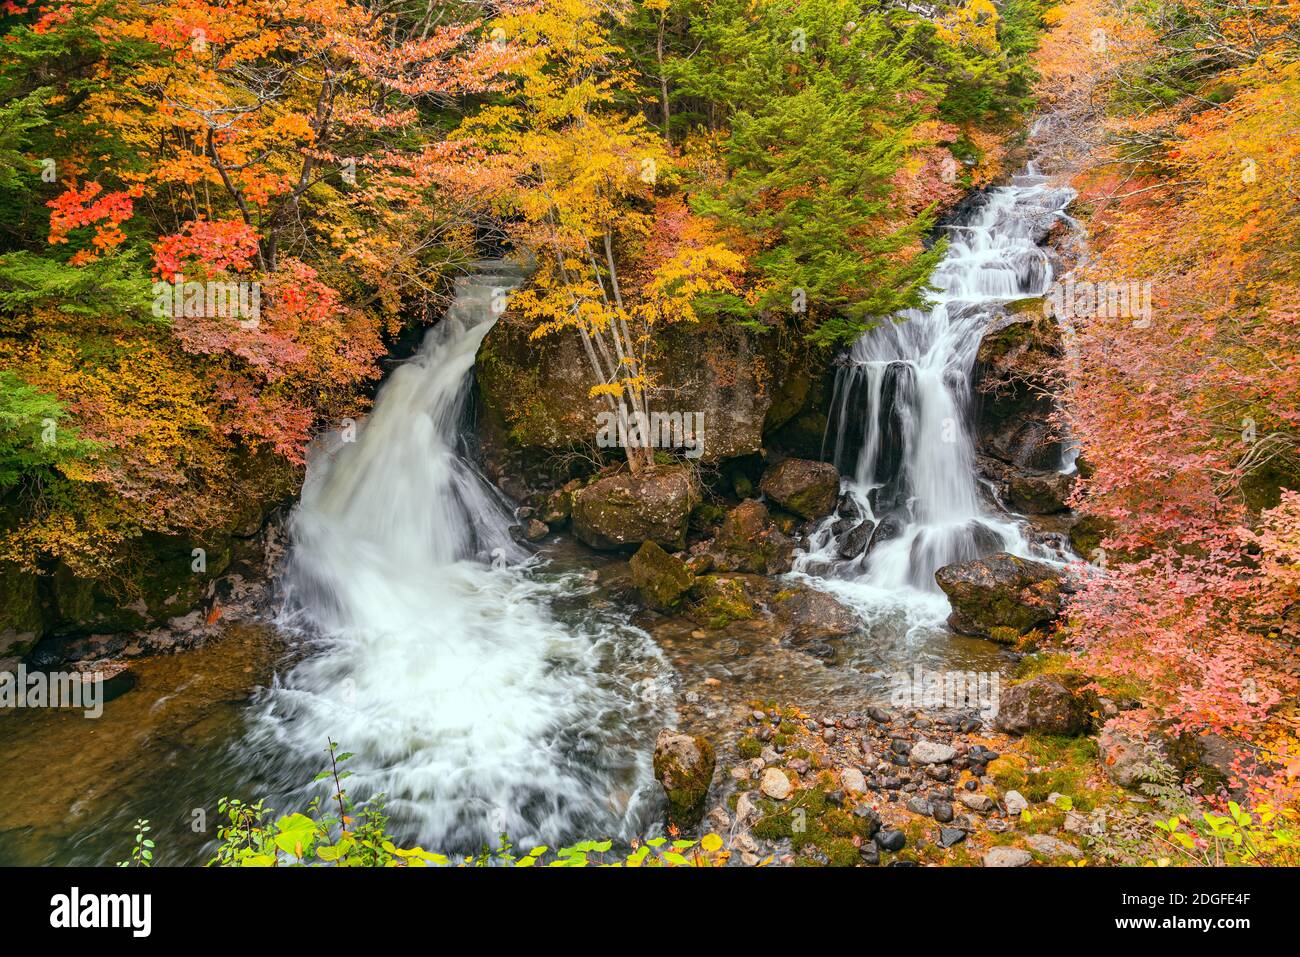 View of Ryuzu Waterfalls with the colorful foliage of autumn season forest. Stock Photo